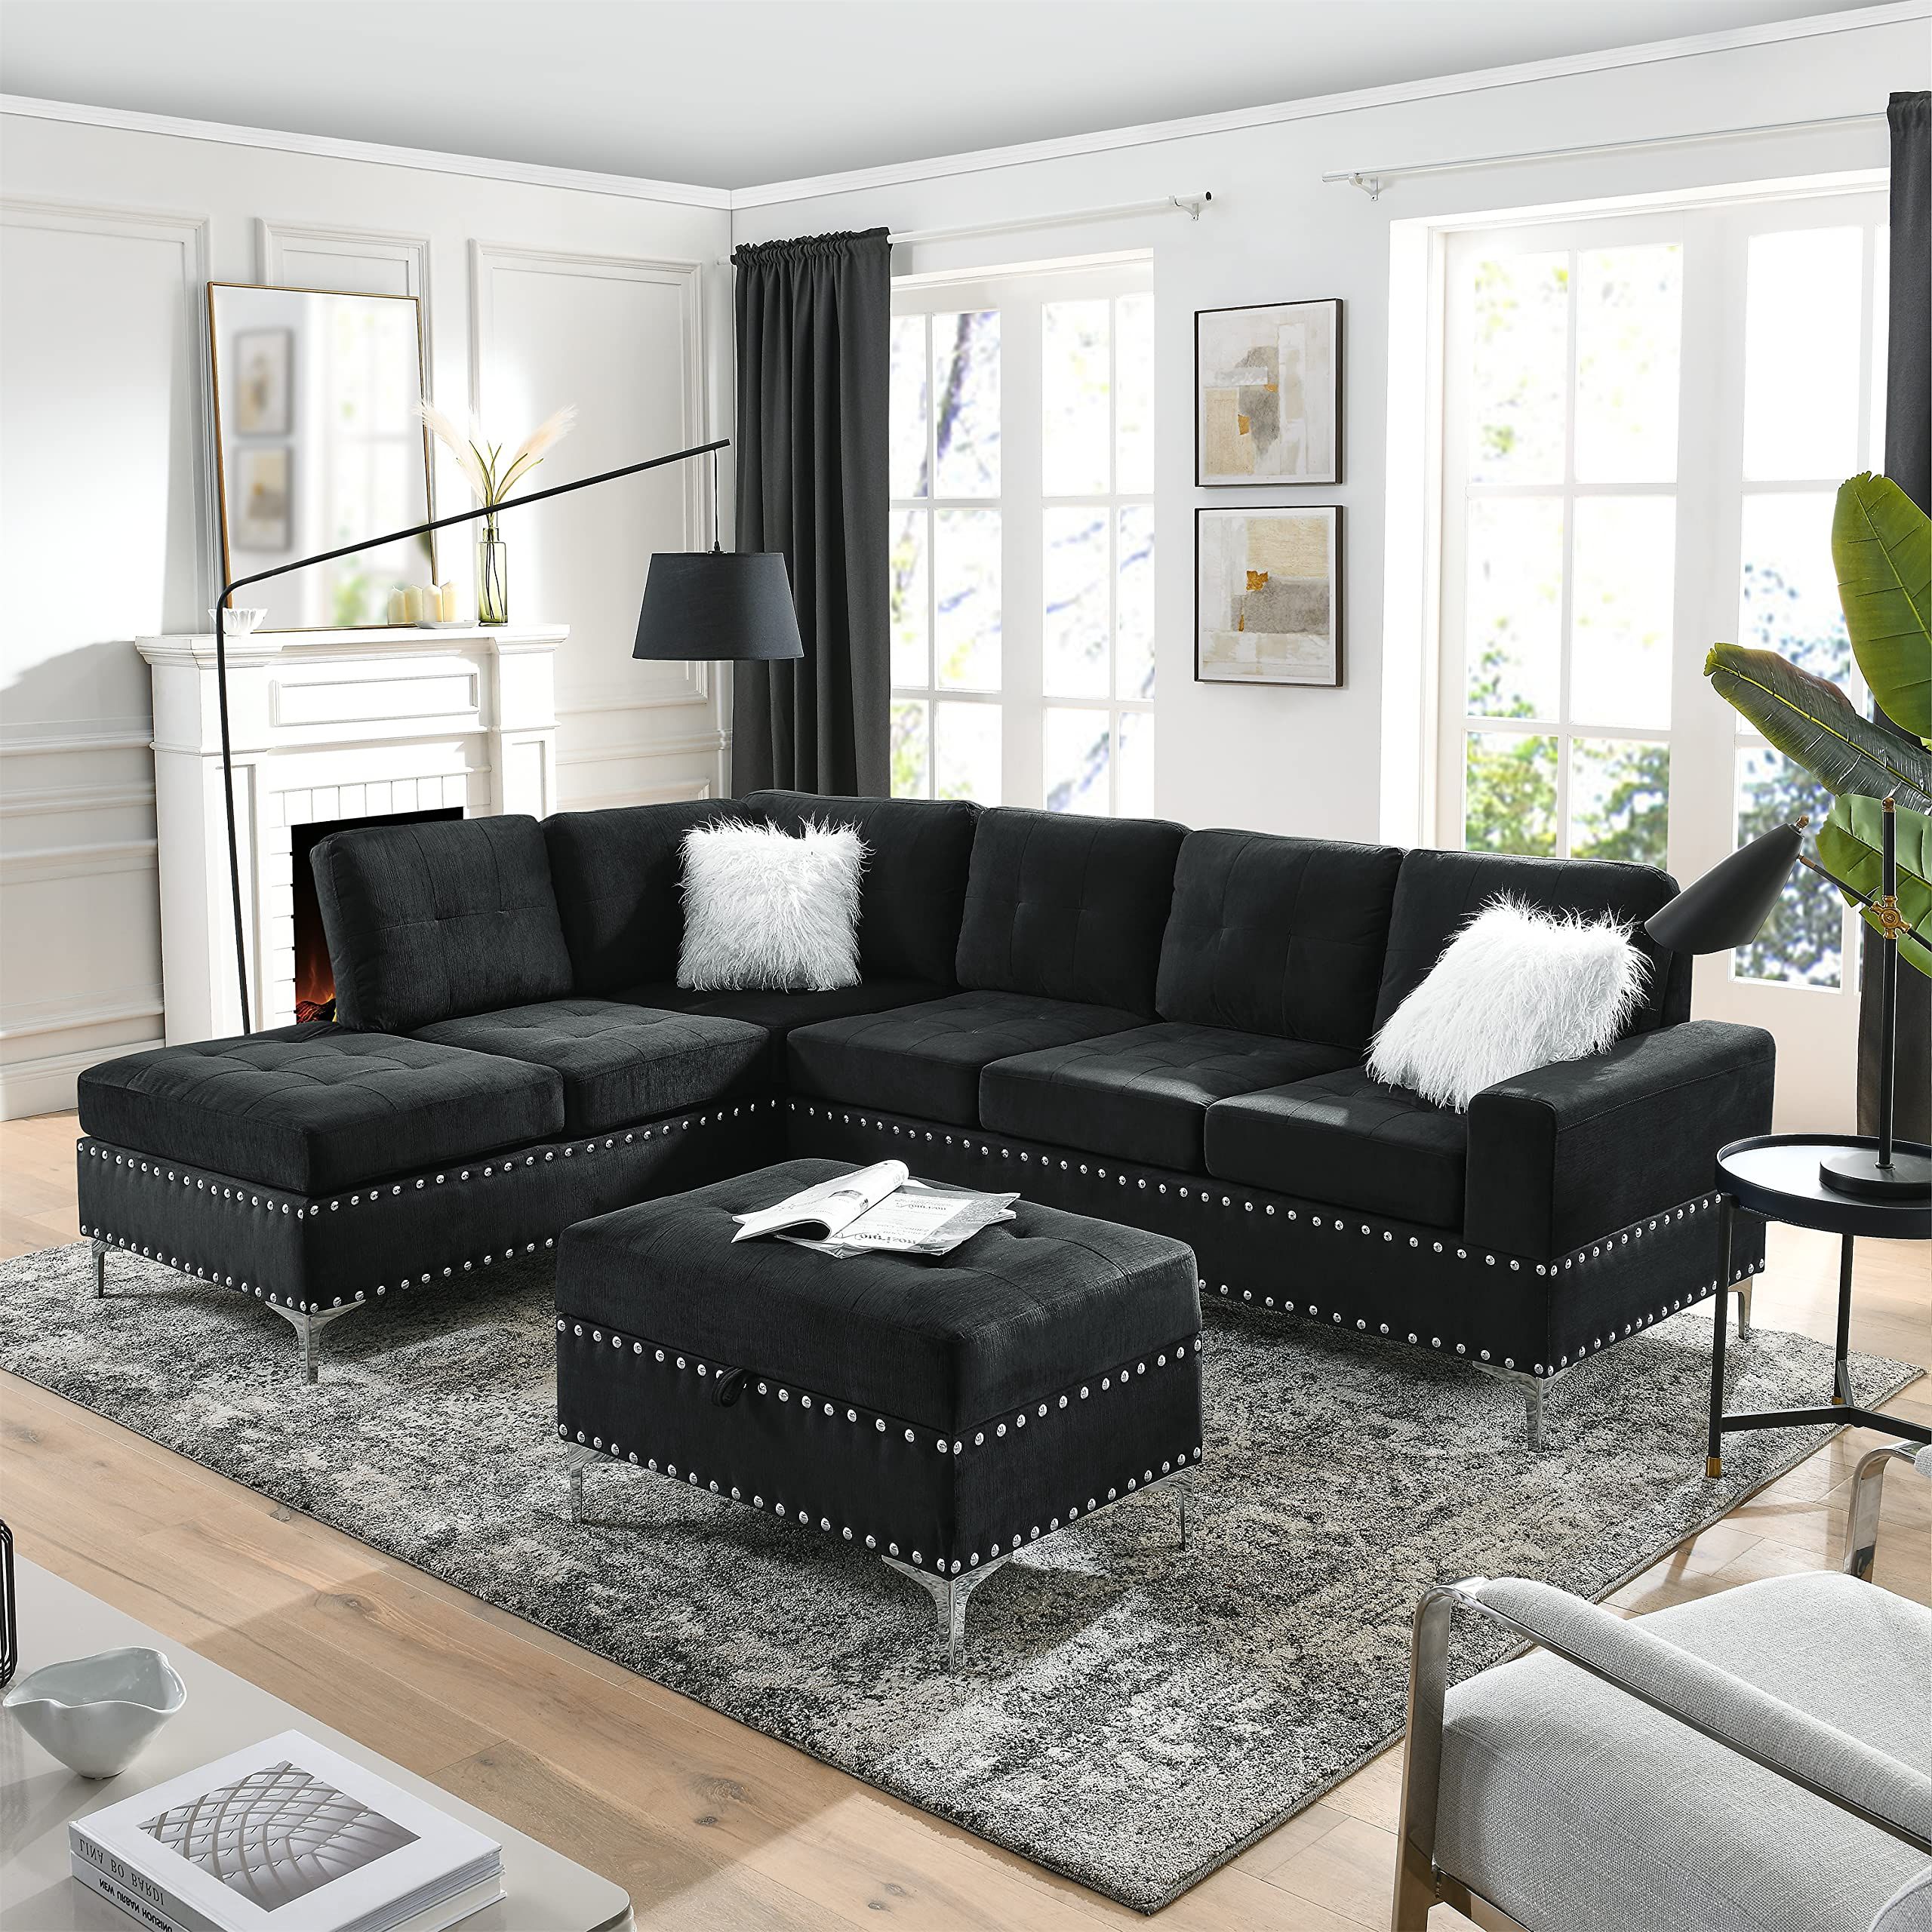 Preferred L Shape Couches With Reversible Chaises Within Buy Melpomene Living Room Sectional Sofa Set With Reversible Chaise (View 15 of 15)